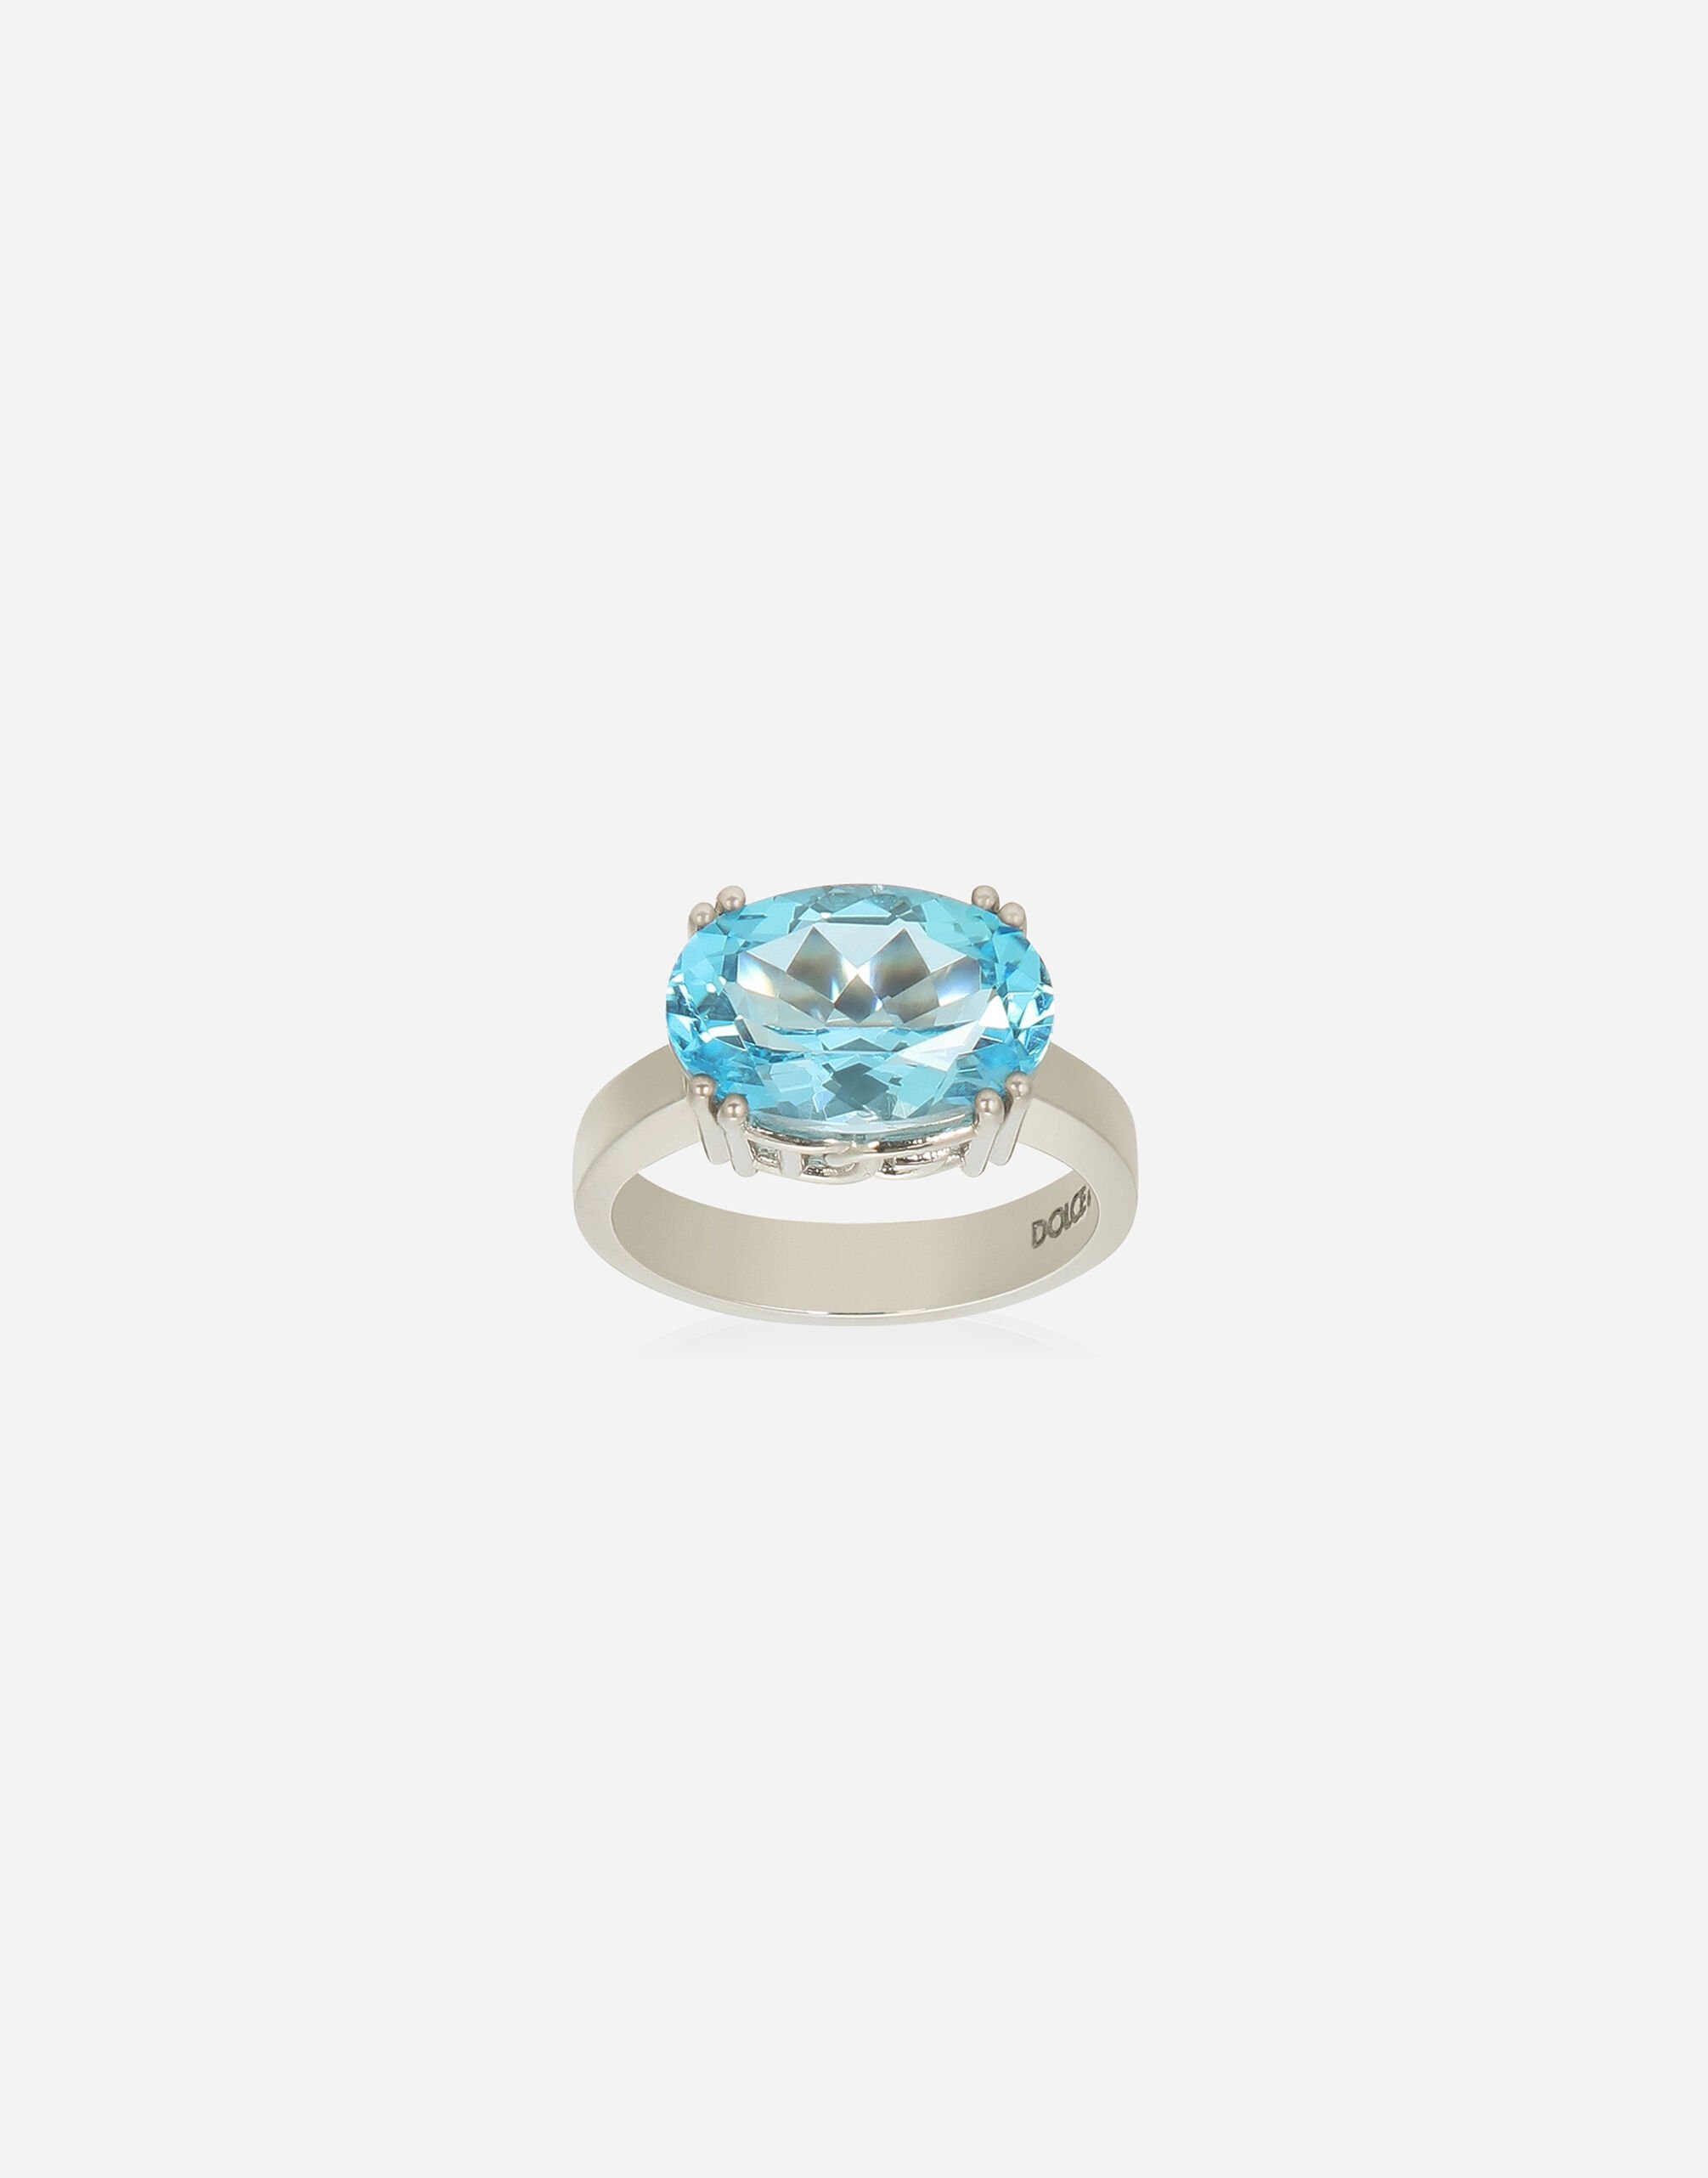 Dolce & Gabbana 18k white gold Anna ring with light blue topaz Gold WRQA1GWQC01